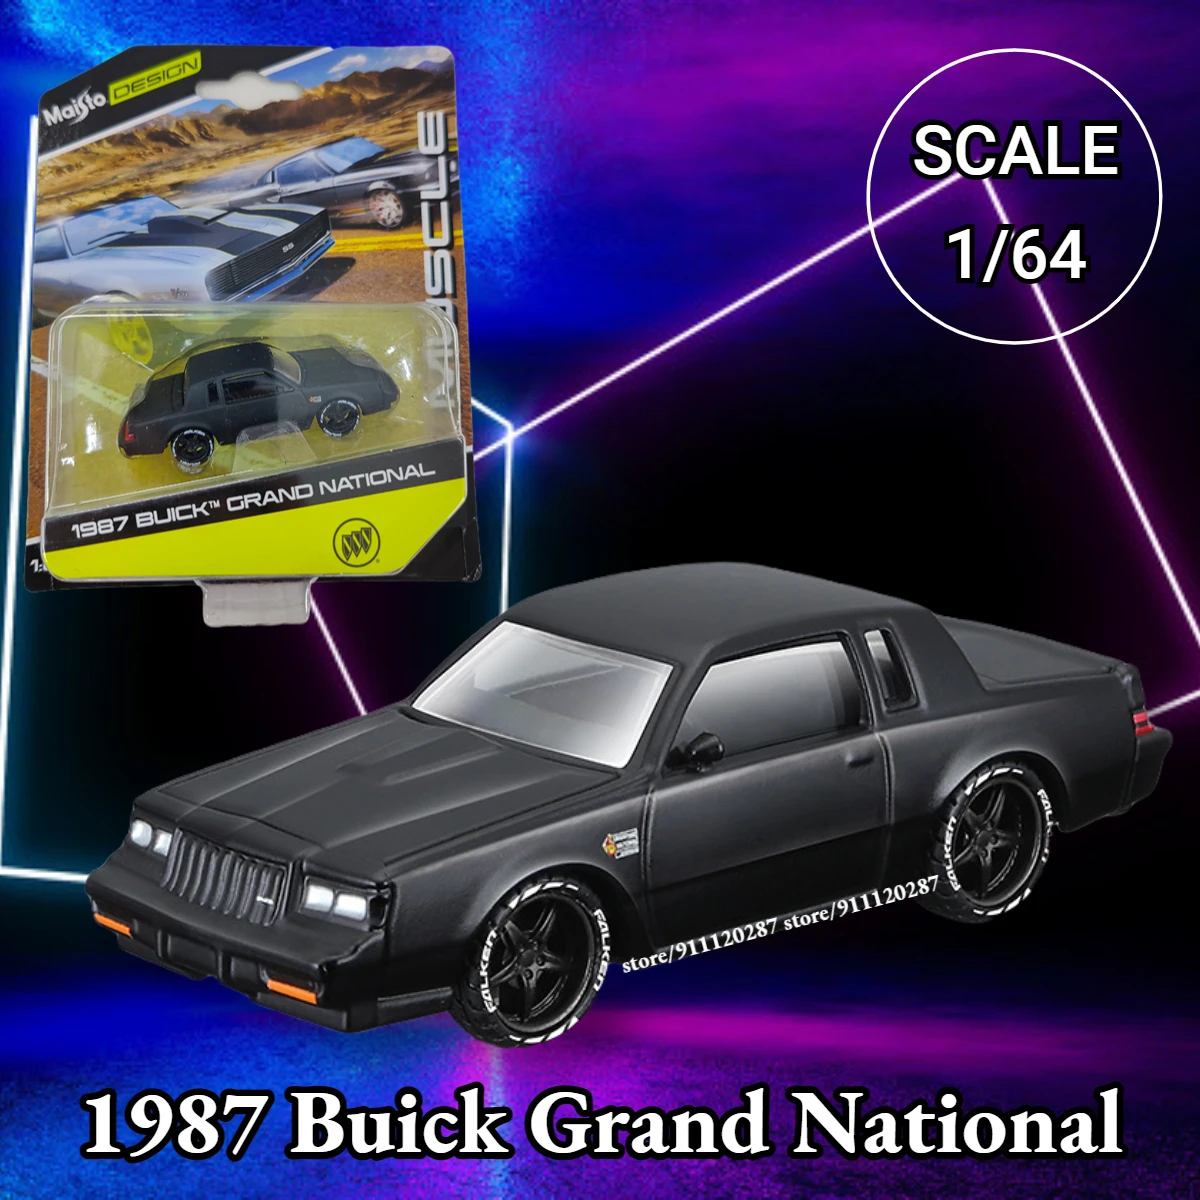 

Maisto 1:64 Mini Vintage Car Model, 1987 Buick Grand National Scale Miniature Diecast Vehicle Collection Toy for Boy